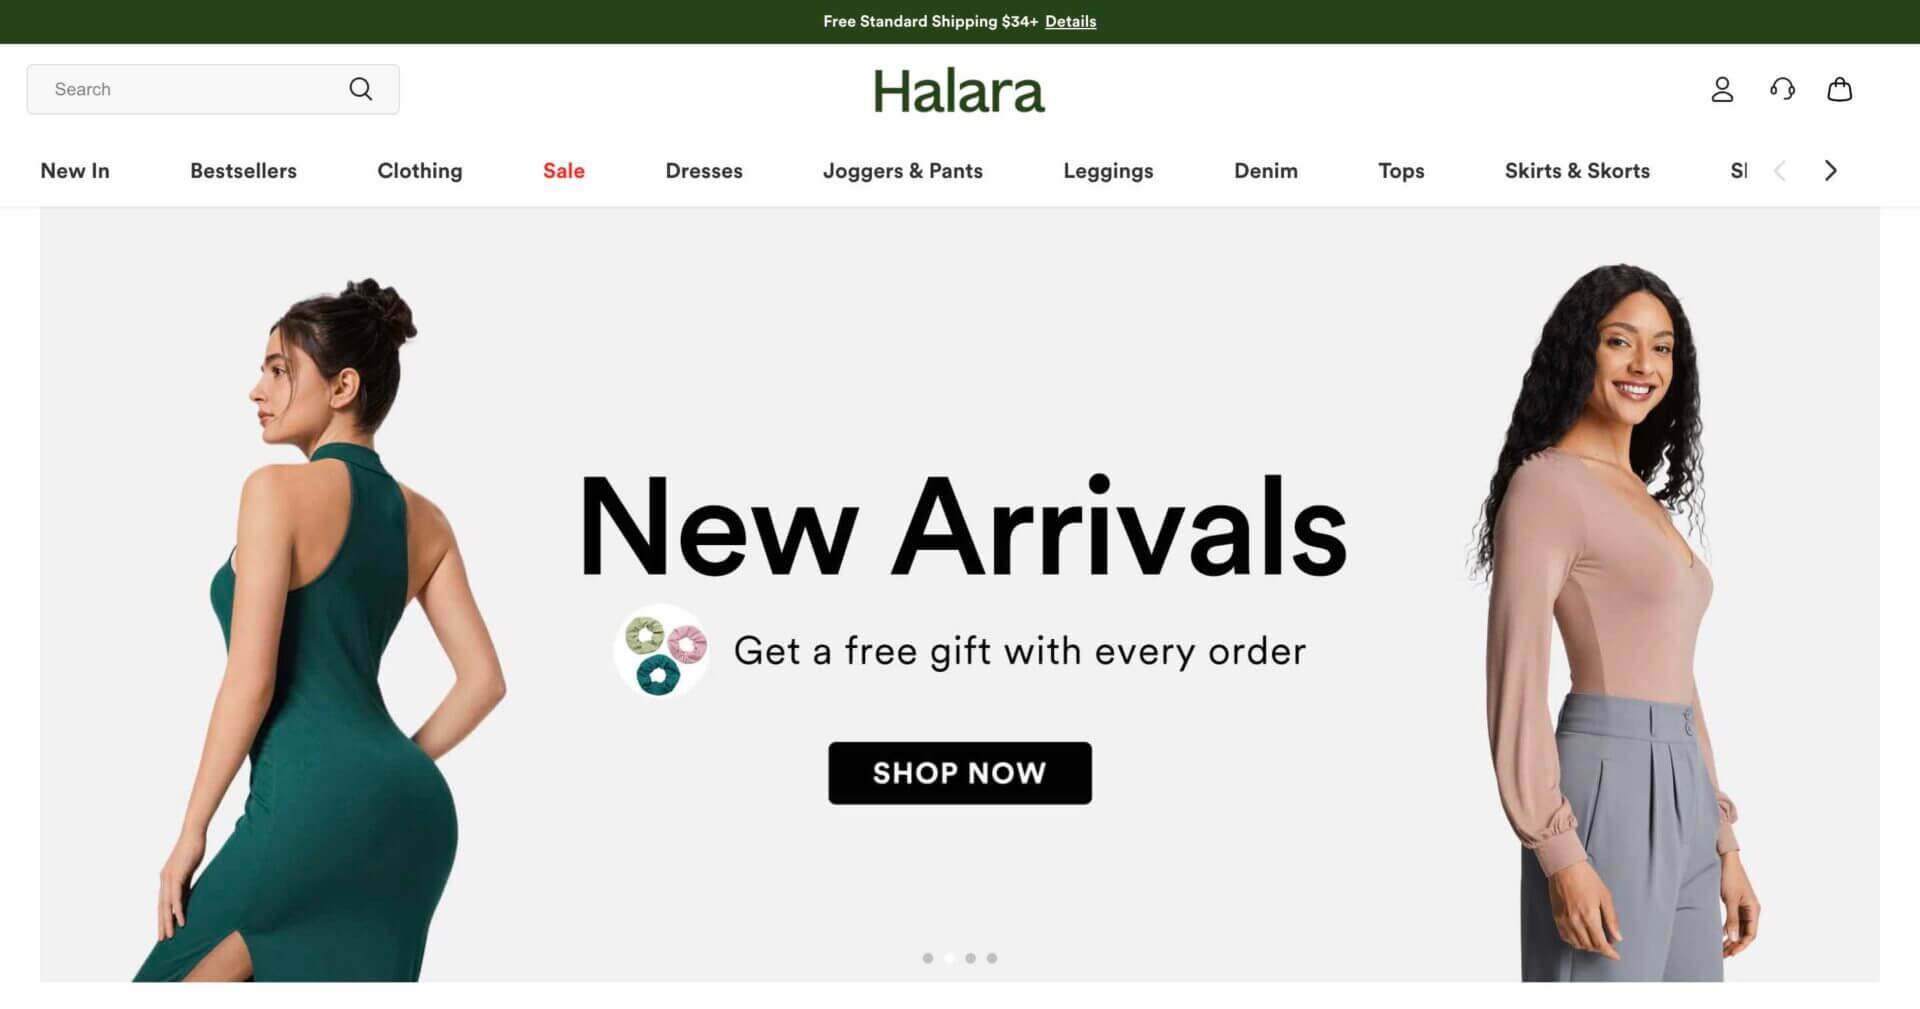 Is Halara Fast Fashion? How Sustainable is Halara? Let's discuss.